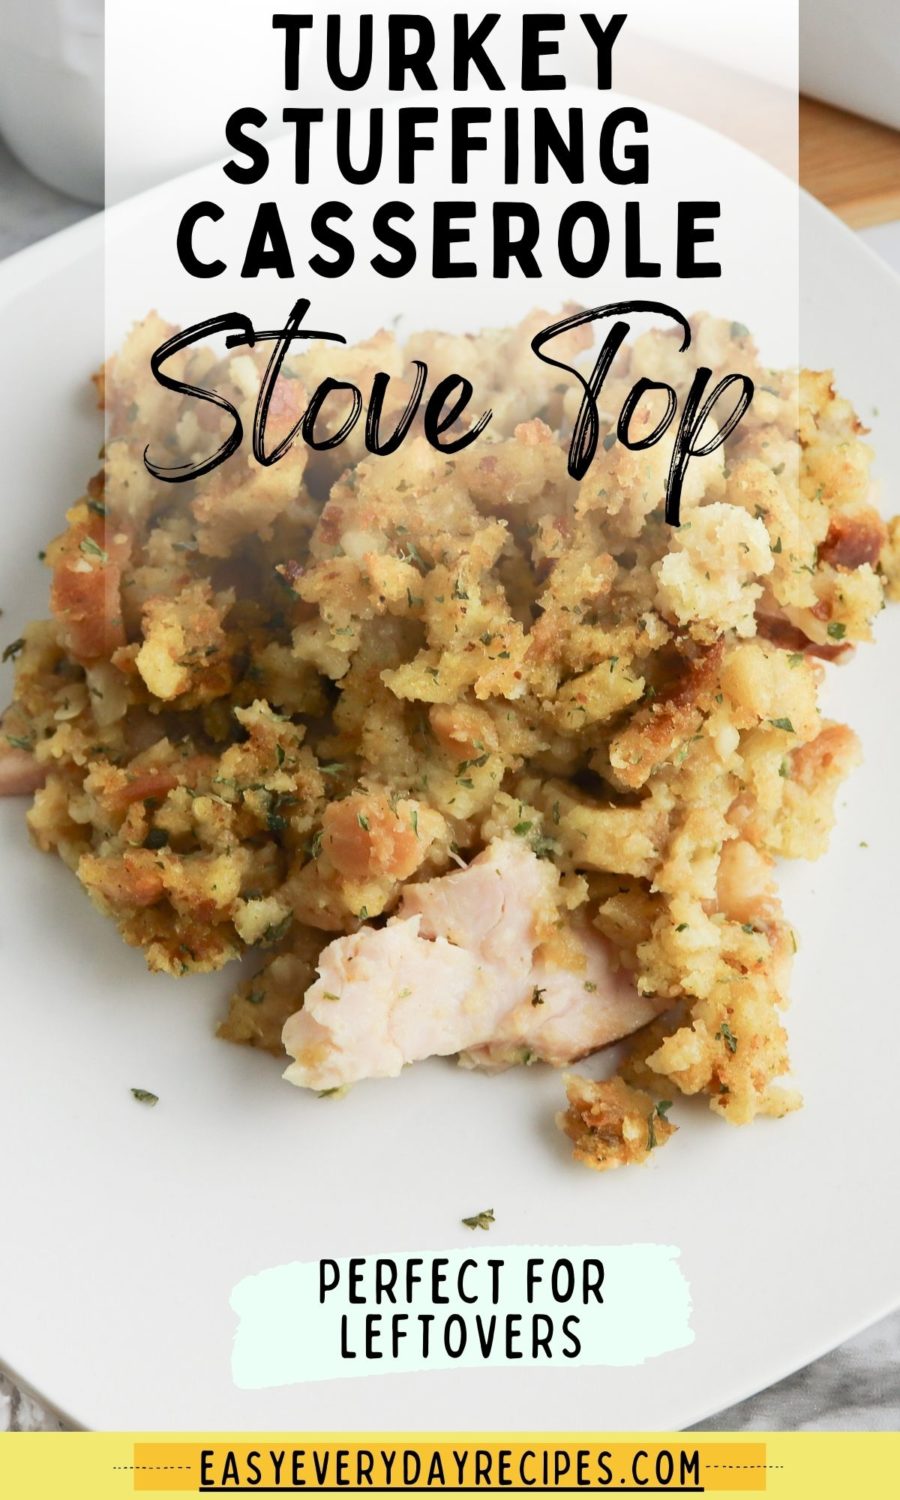 Turkey stuffing casserole stove top perfect for leftovers.